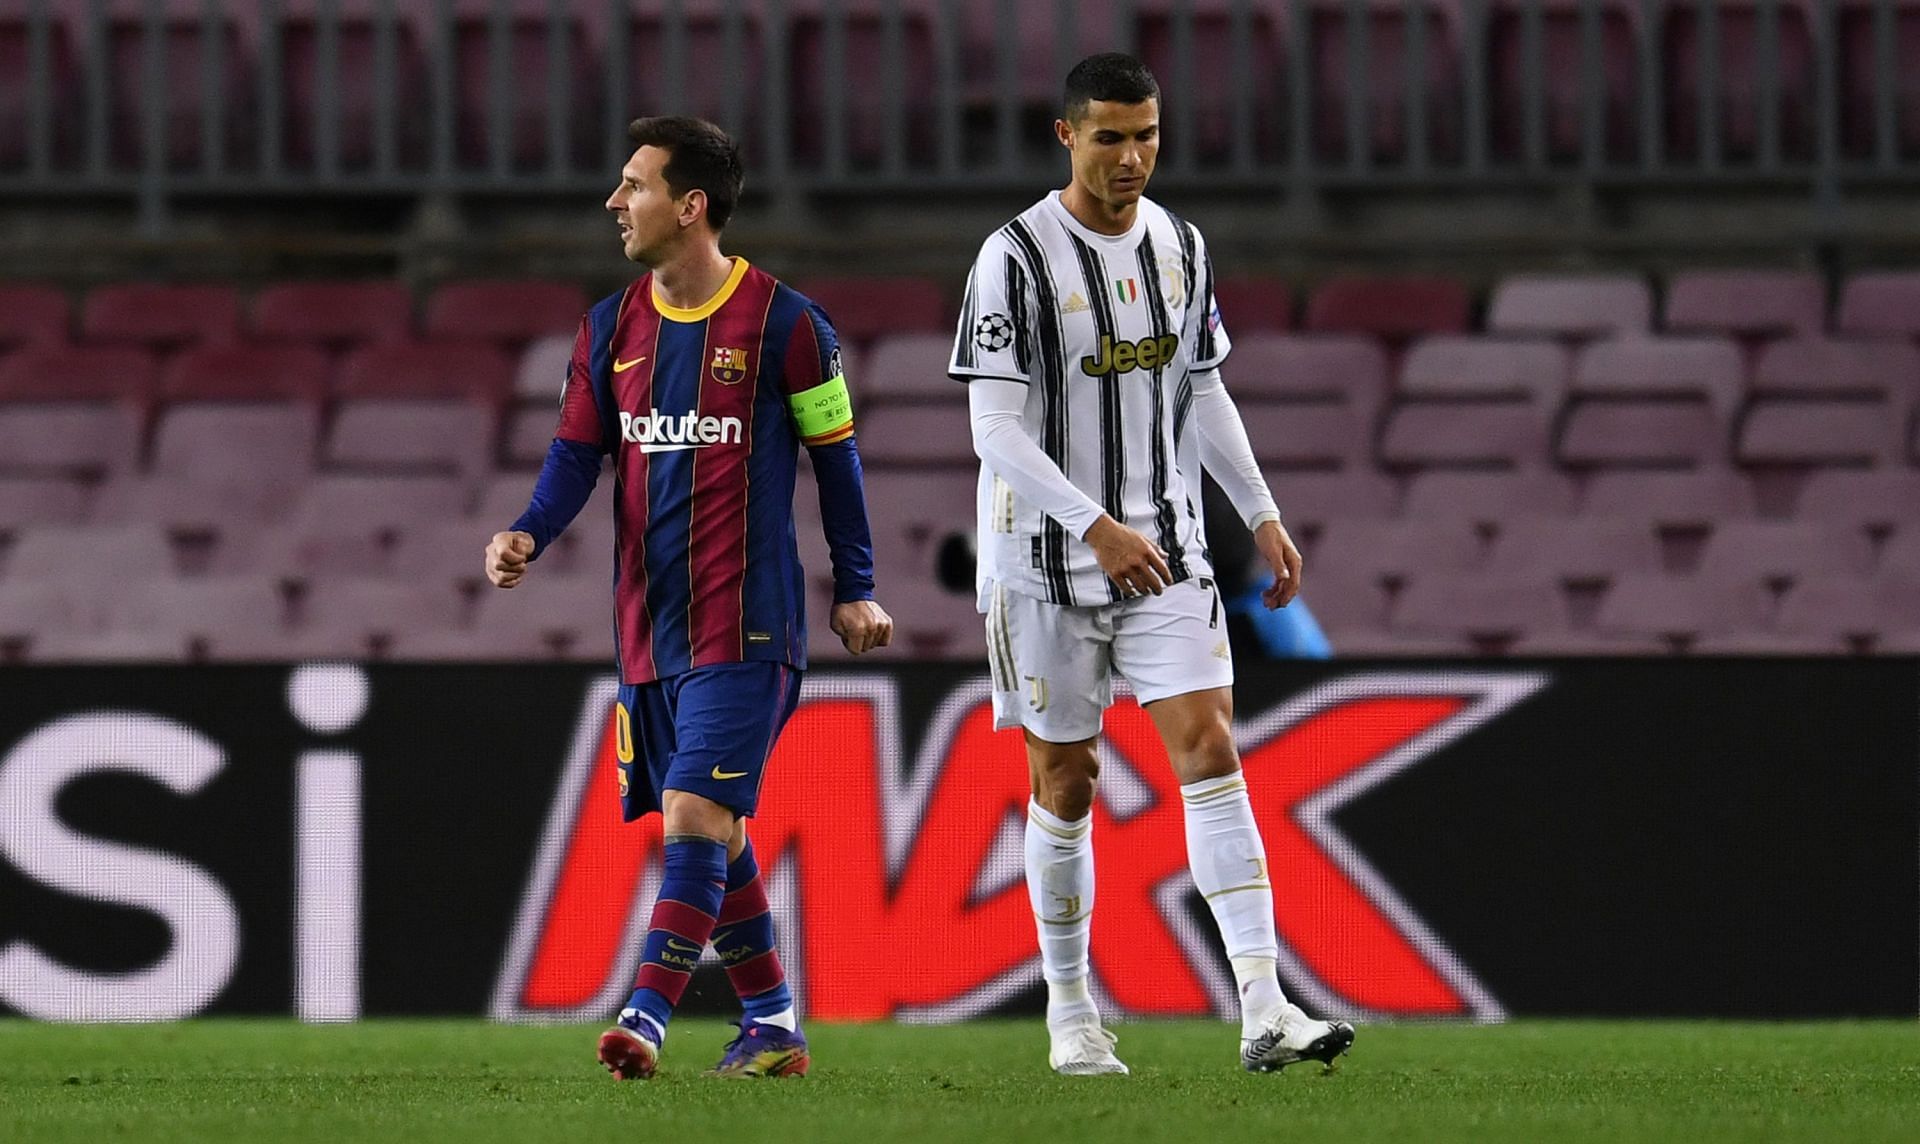 Lionel Messi and Cristiano Ronaldo face off for a last time in the UEFA Champions League